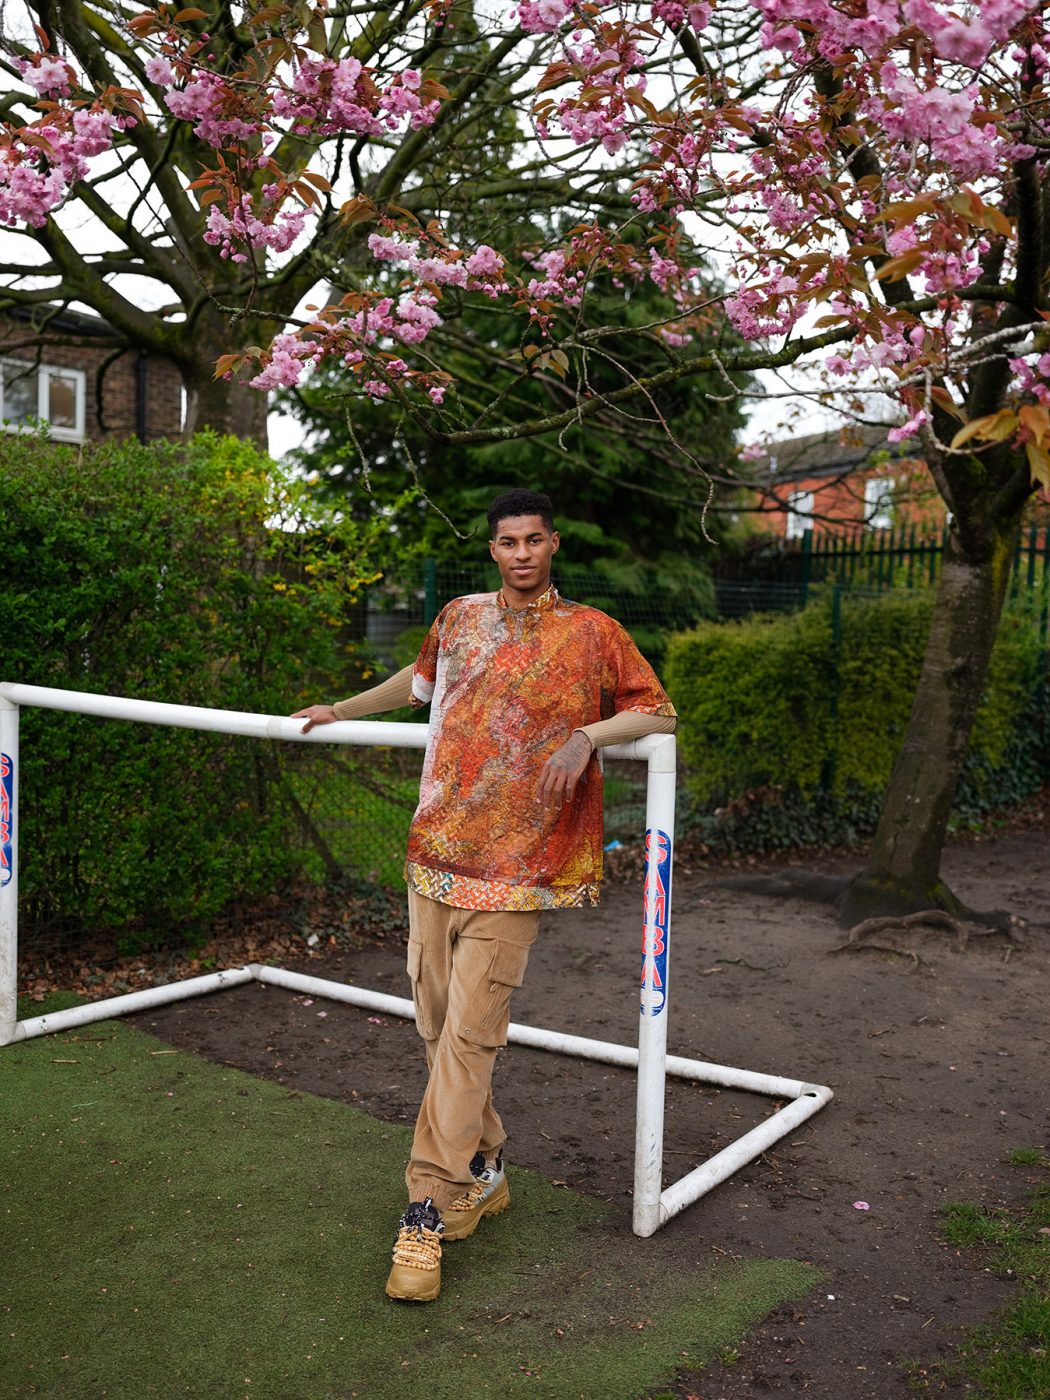 The House of Gorgeous Gucci Portrait of Marcus Rashford